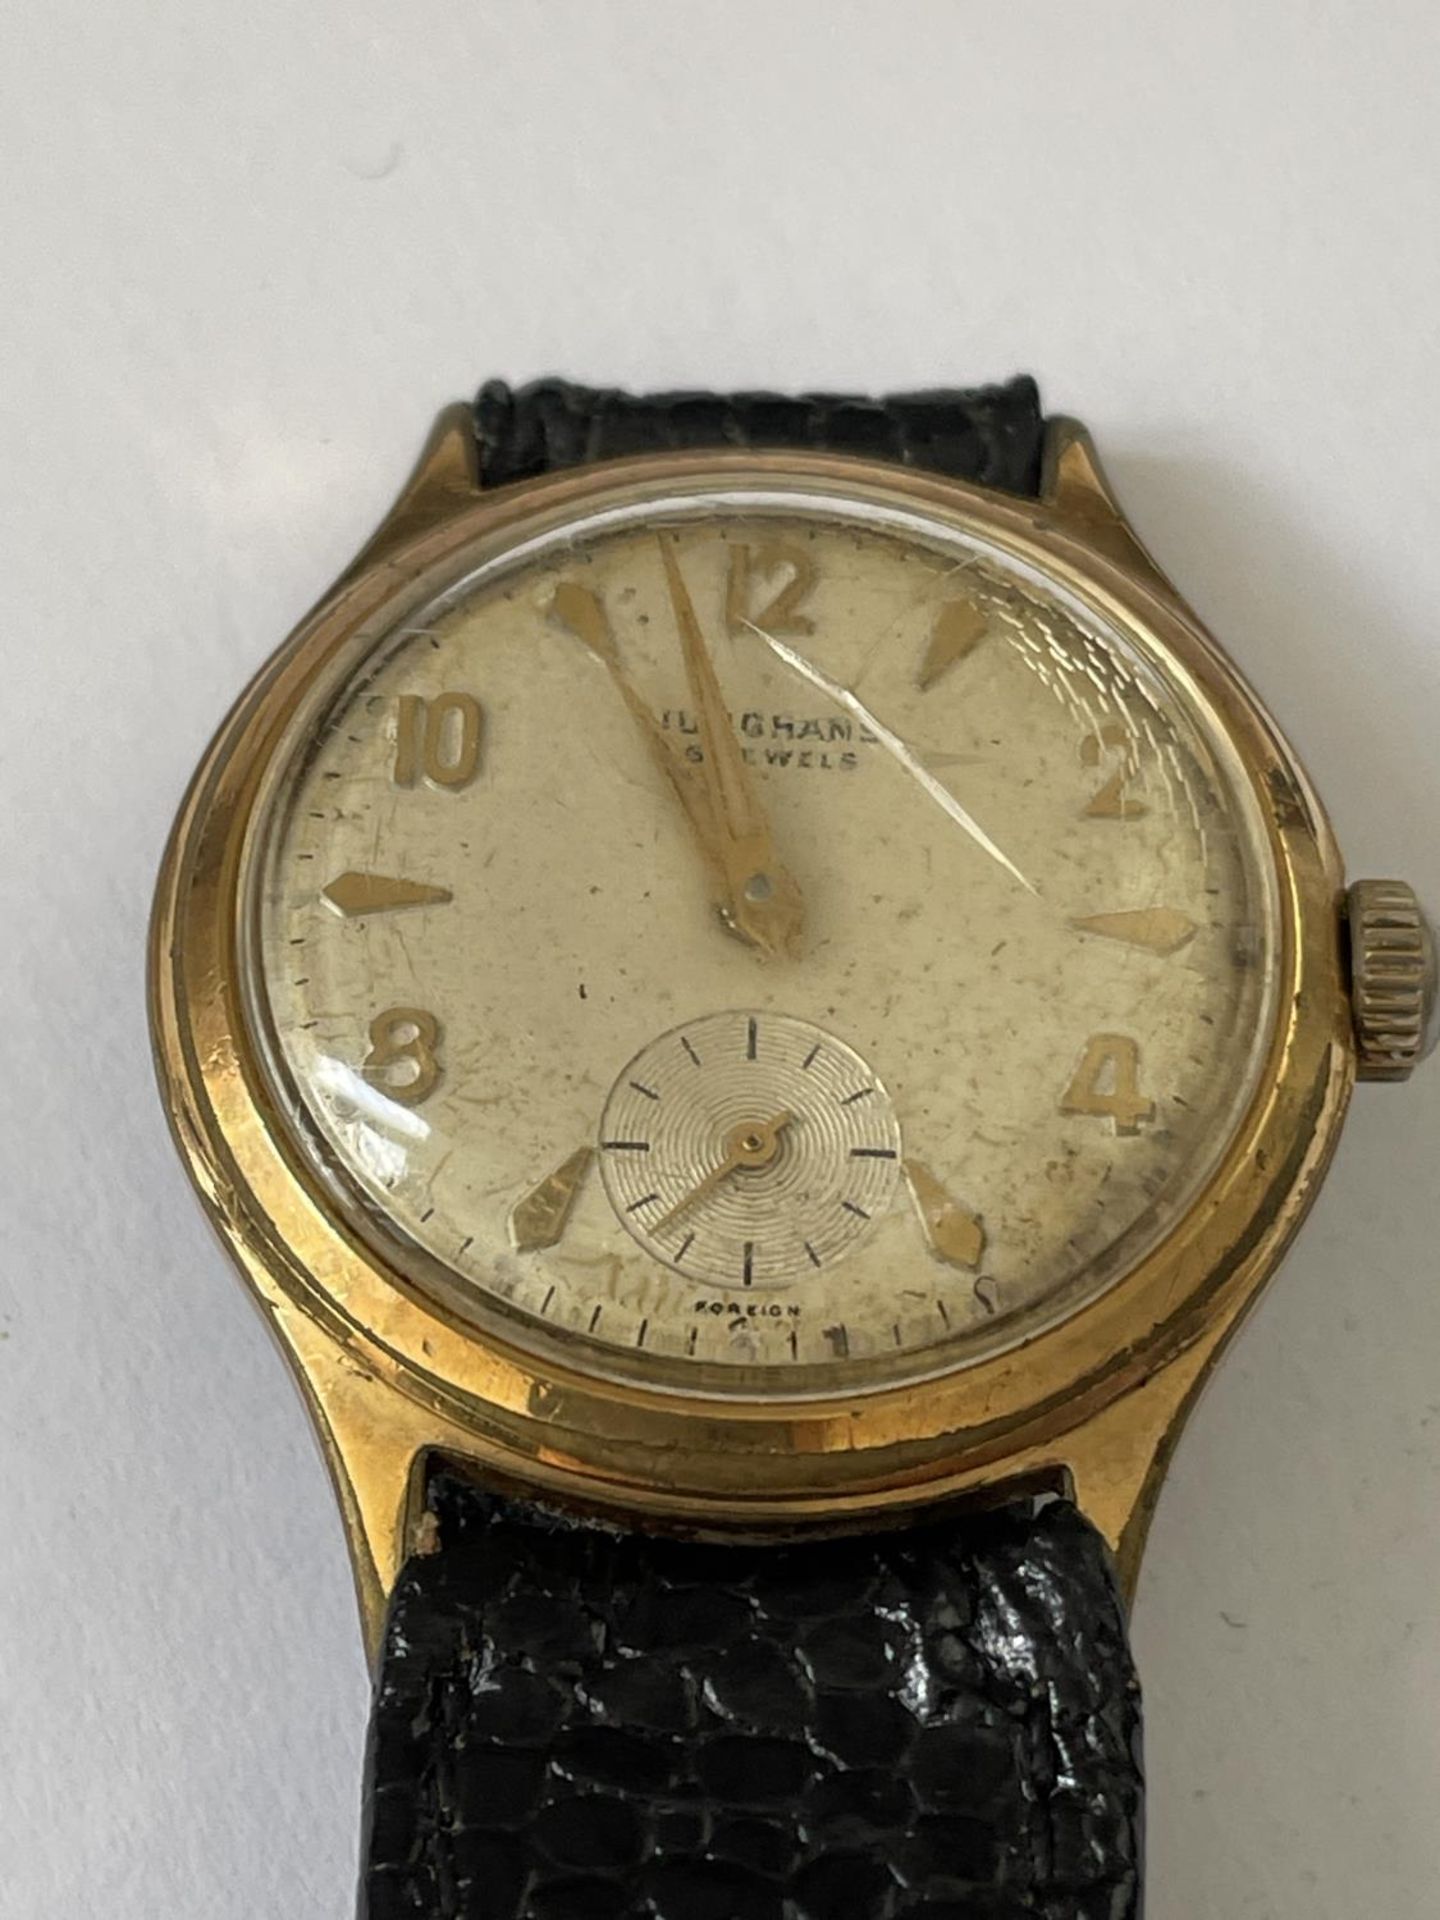 A 1960'S JUNGHANS 16 JEWEL WRIST WATCH WITH SUB DIAL AND BLACK LEATHER STRAP. SEEN WORKING BUT NO - Image 2 of 3